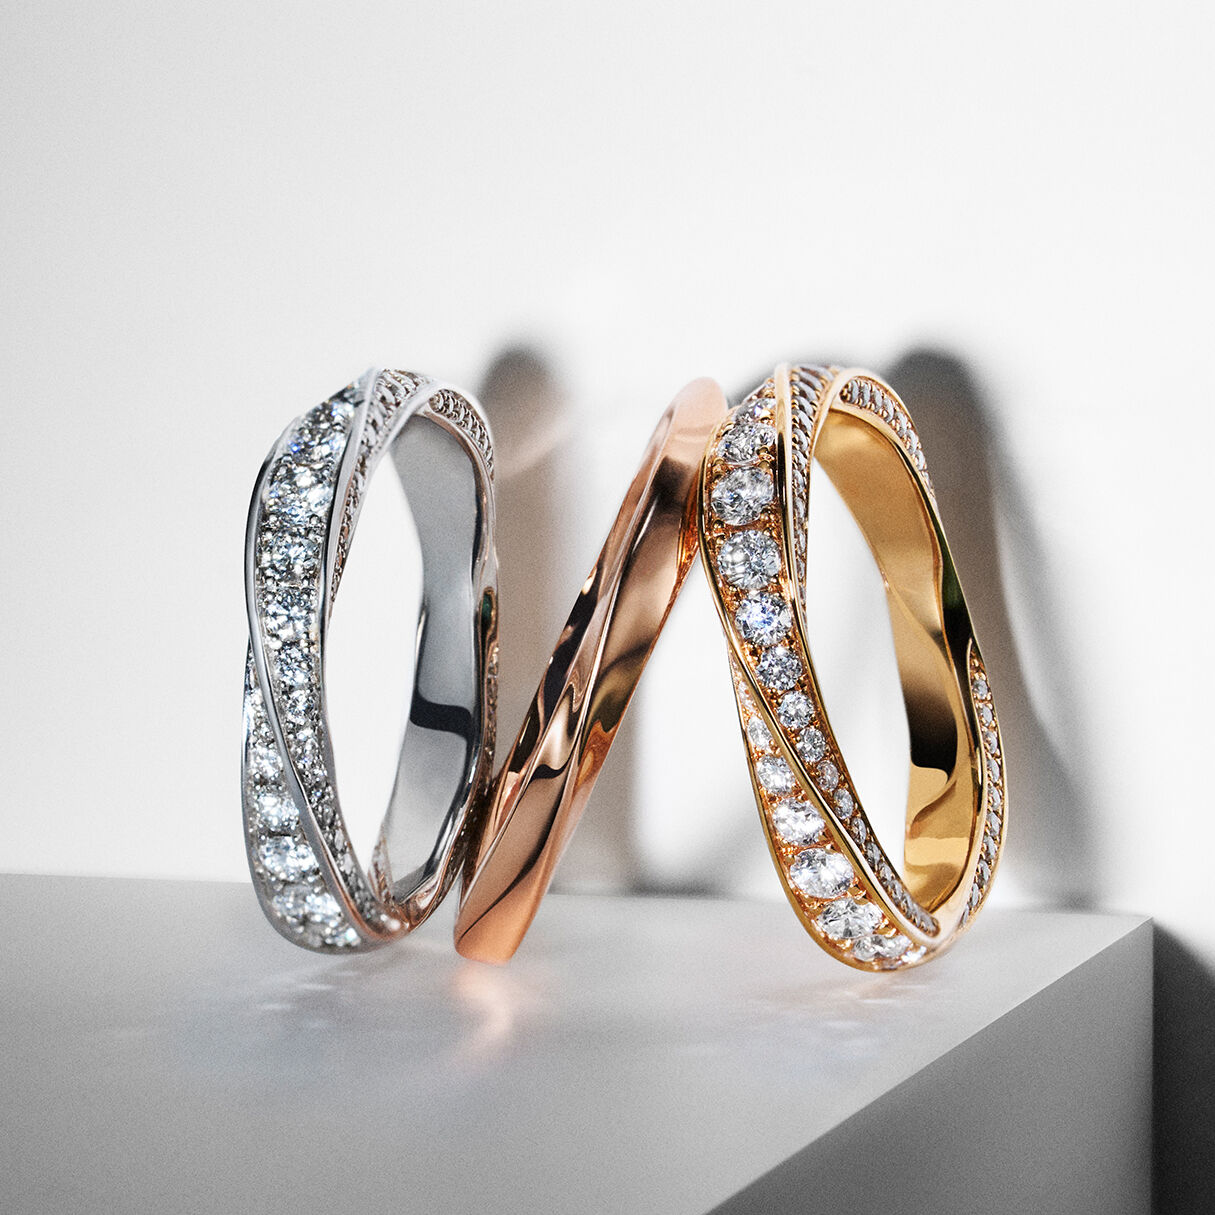 Still life image shows Graff white diamond white gold, rose gold and yellow gold spiral rings 